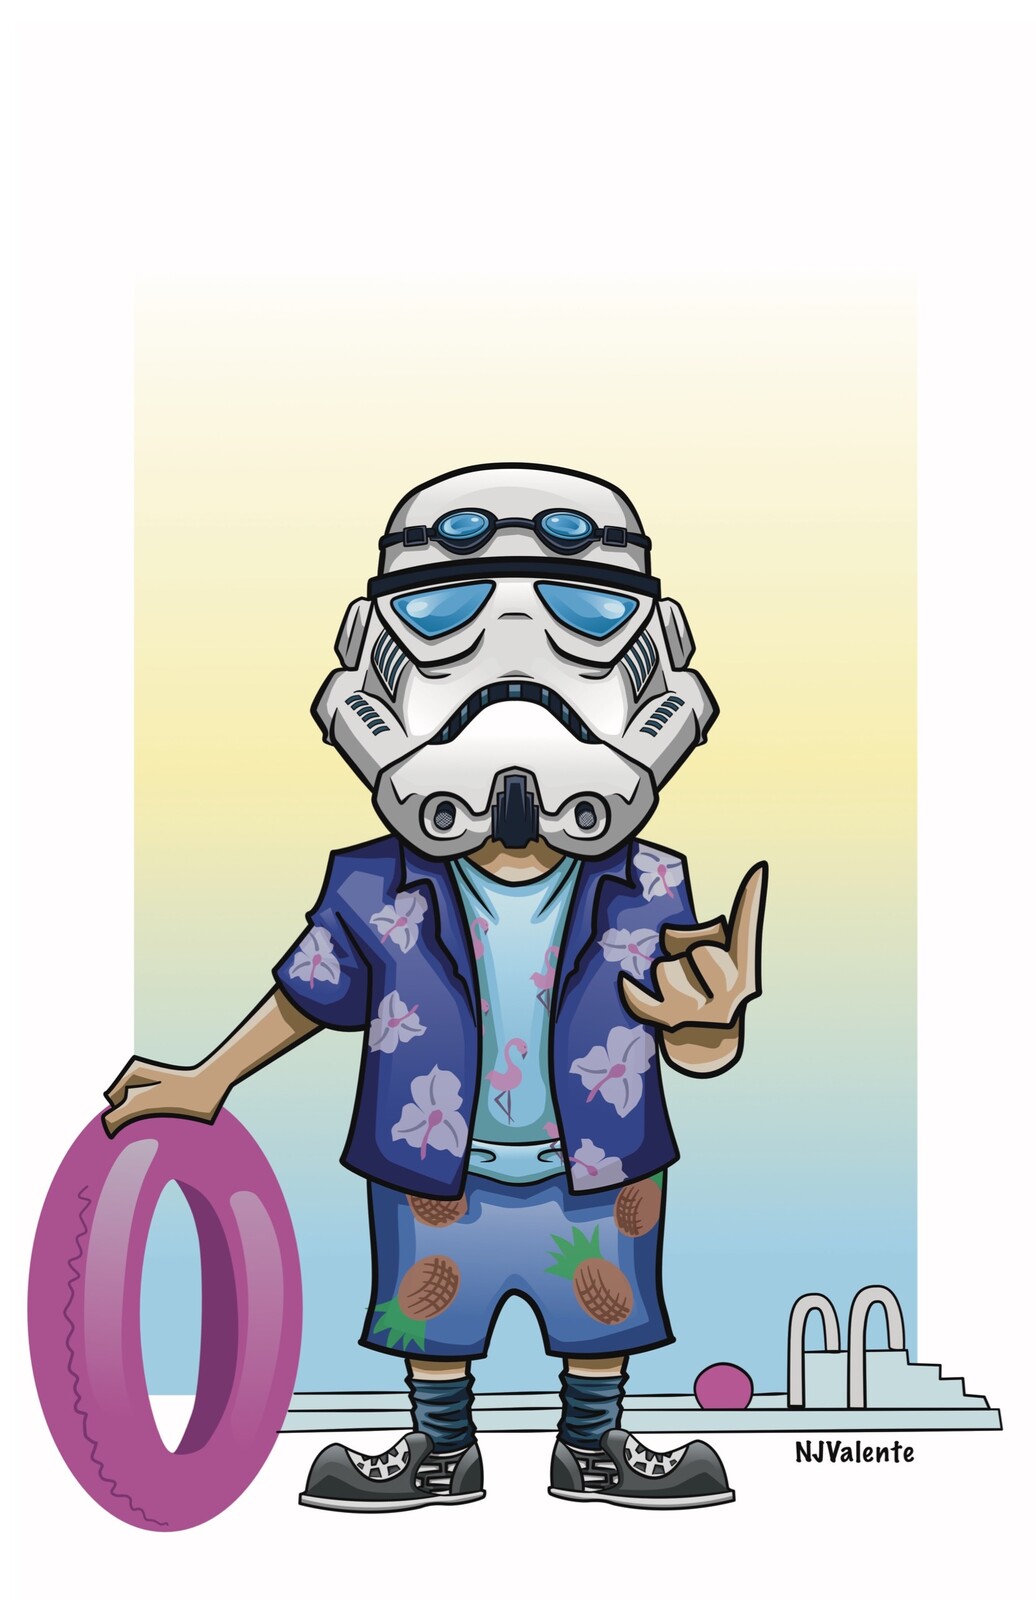 @VacationTrooper vector illustration (commission)